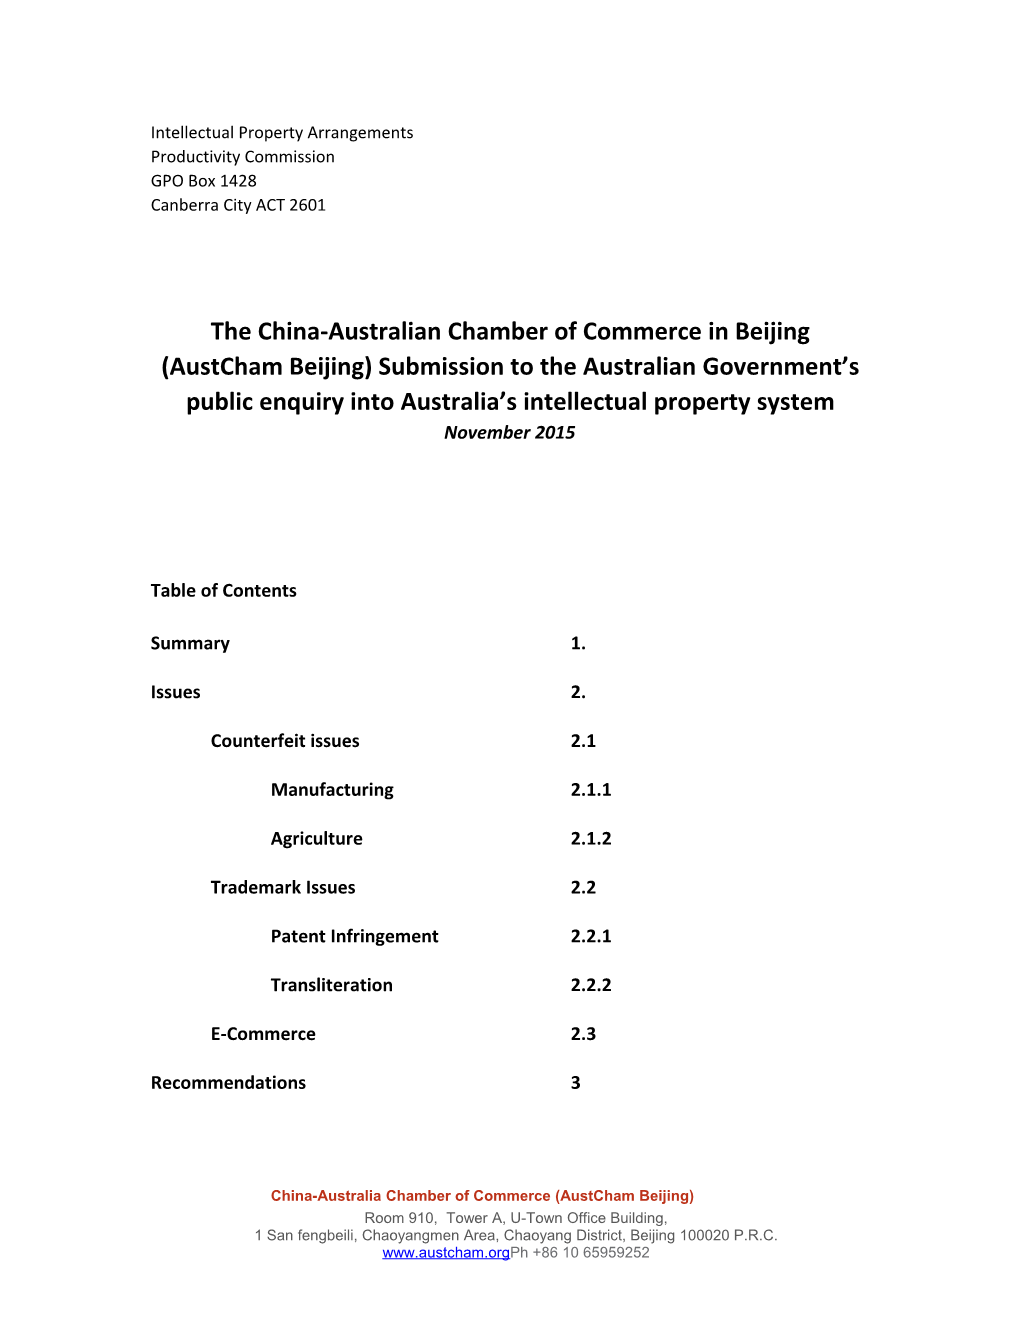 Submission 50 - China-Australia Chamber of Commerce - Intellectual Property Arrangements